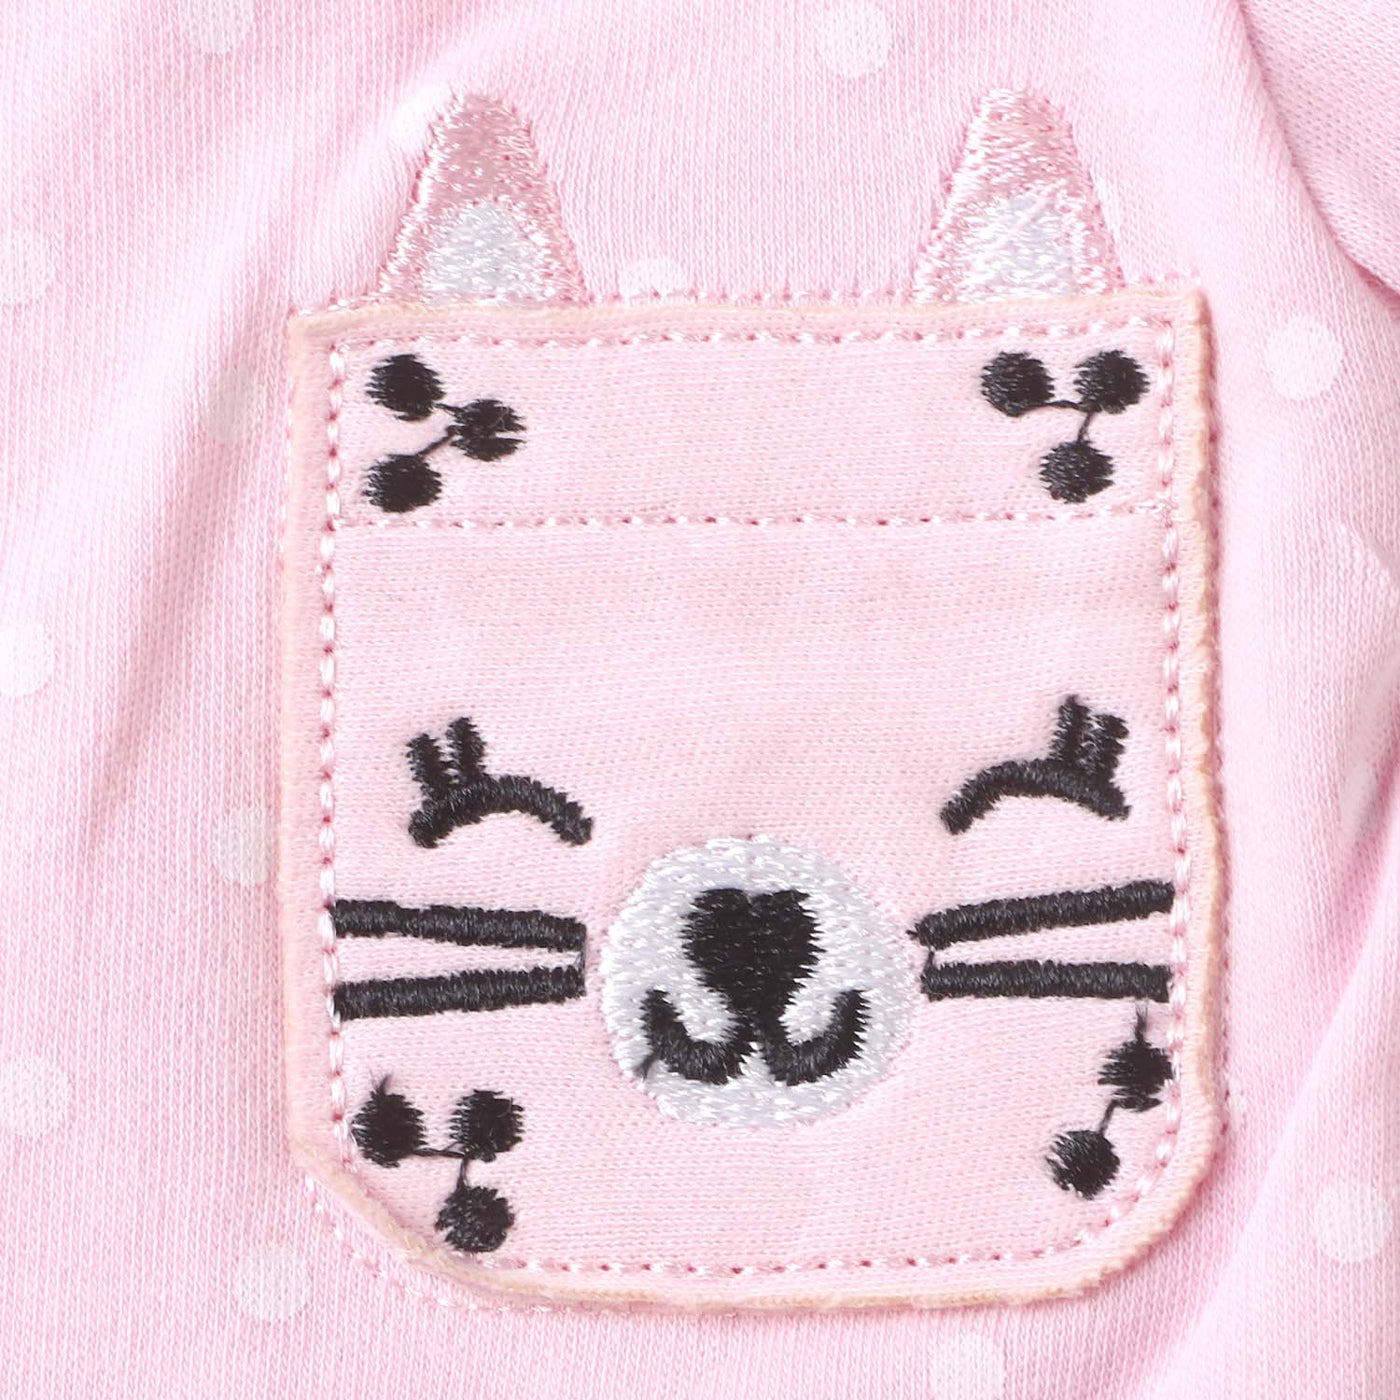 Infant Girls Knitted Romper Cat Pocket - Pink A Boo